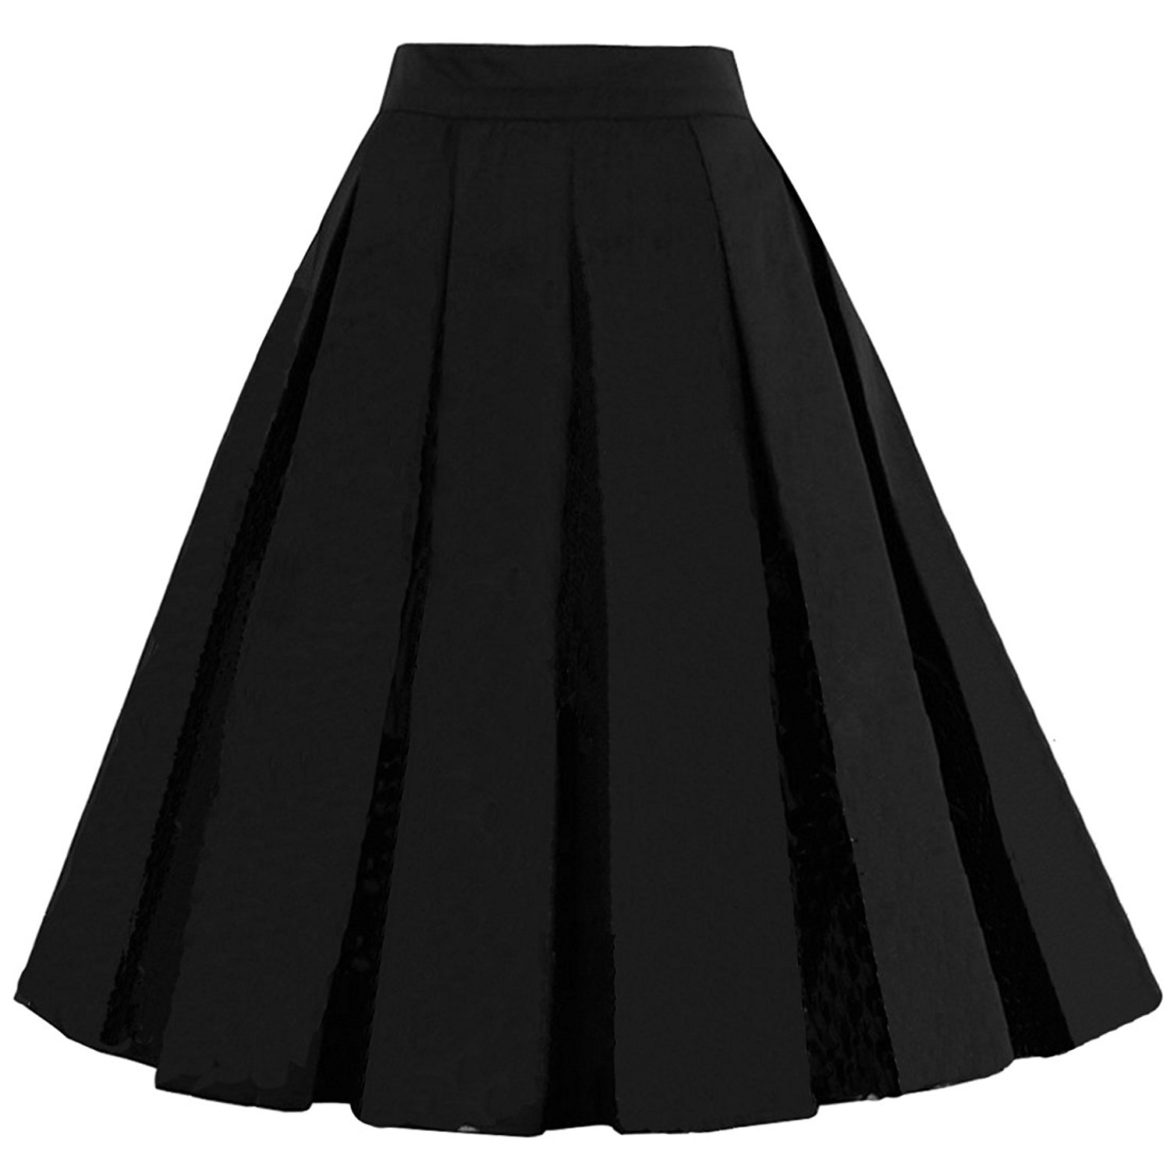 Dressever Women’s Vintage A-Line Printed Pleated Flared Midi Skirts ...